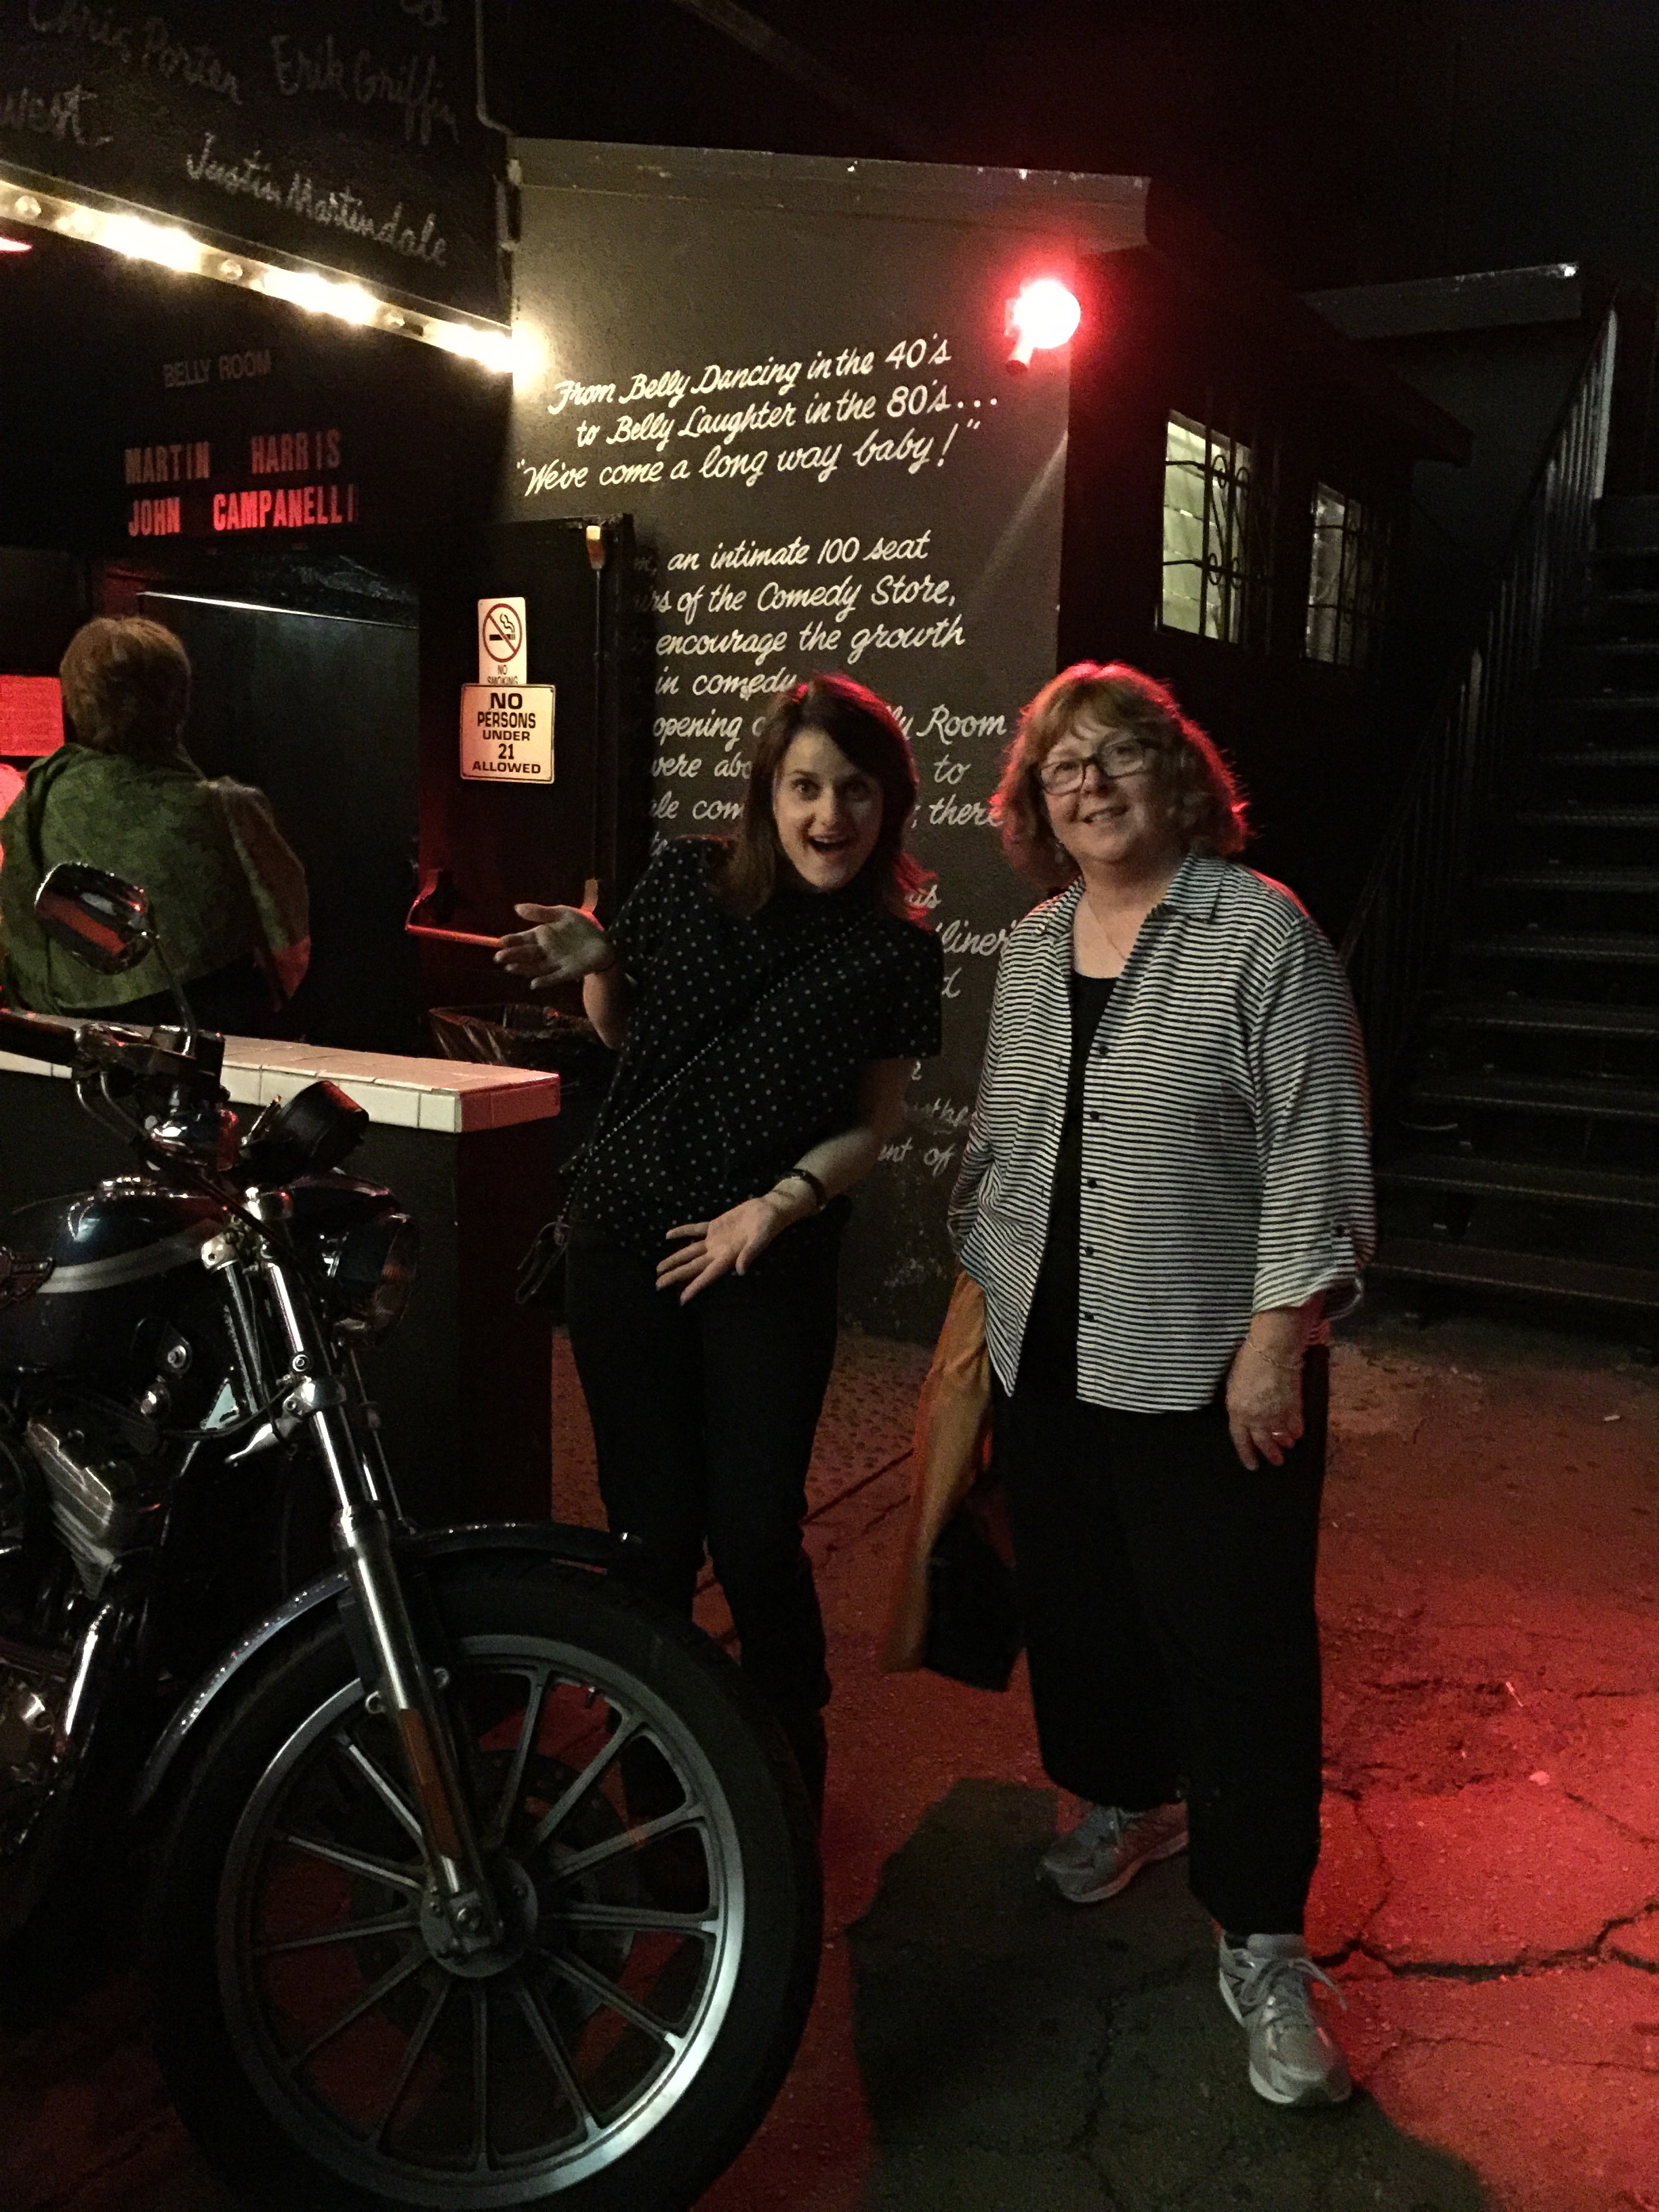 Photo of DJ Choupin and Emilia Barrosse outside, with a motorcycle.